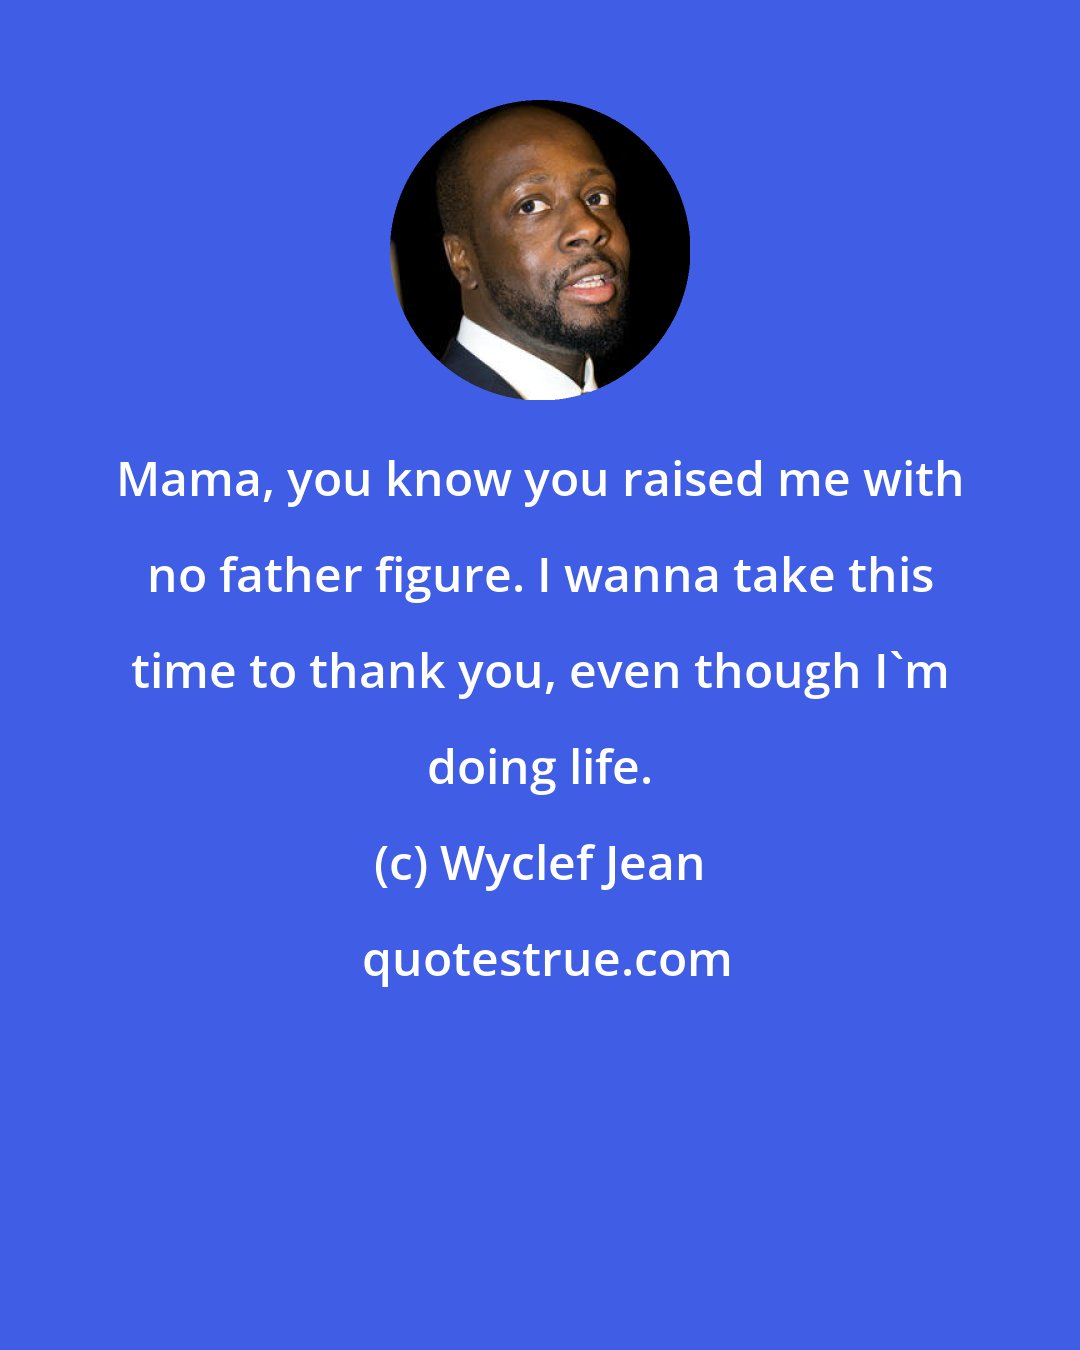 Wyclef Jean: Mama, you know you raised me with no father figure. I wanna take this time to thank you, even though I'm doing life.